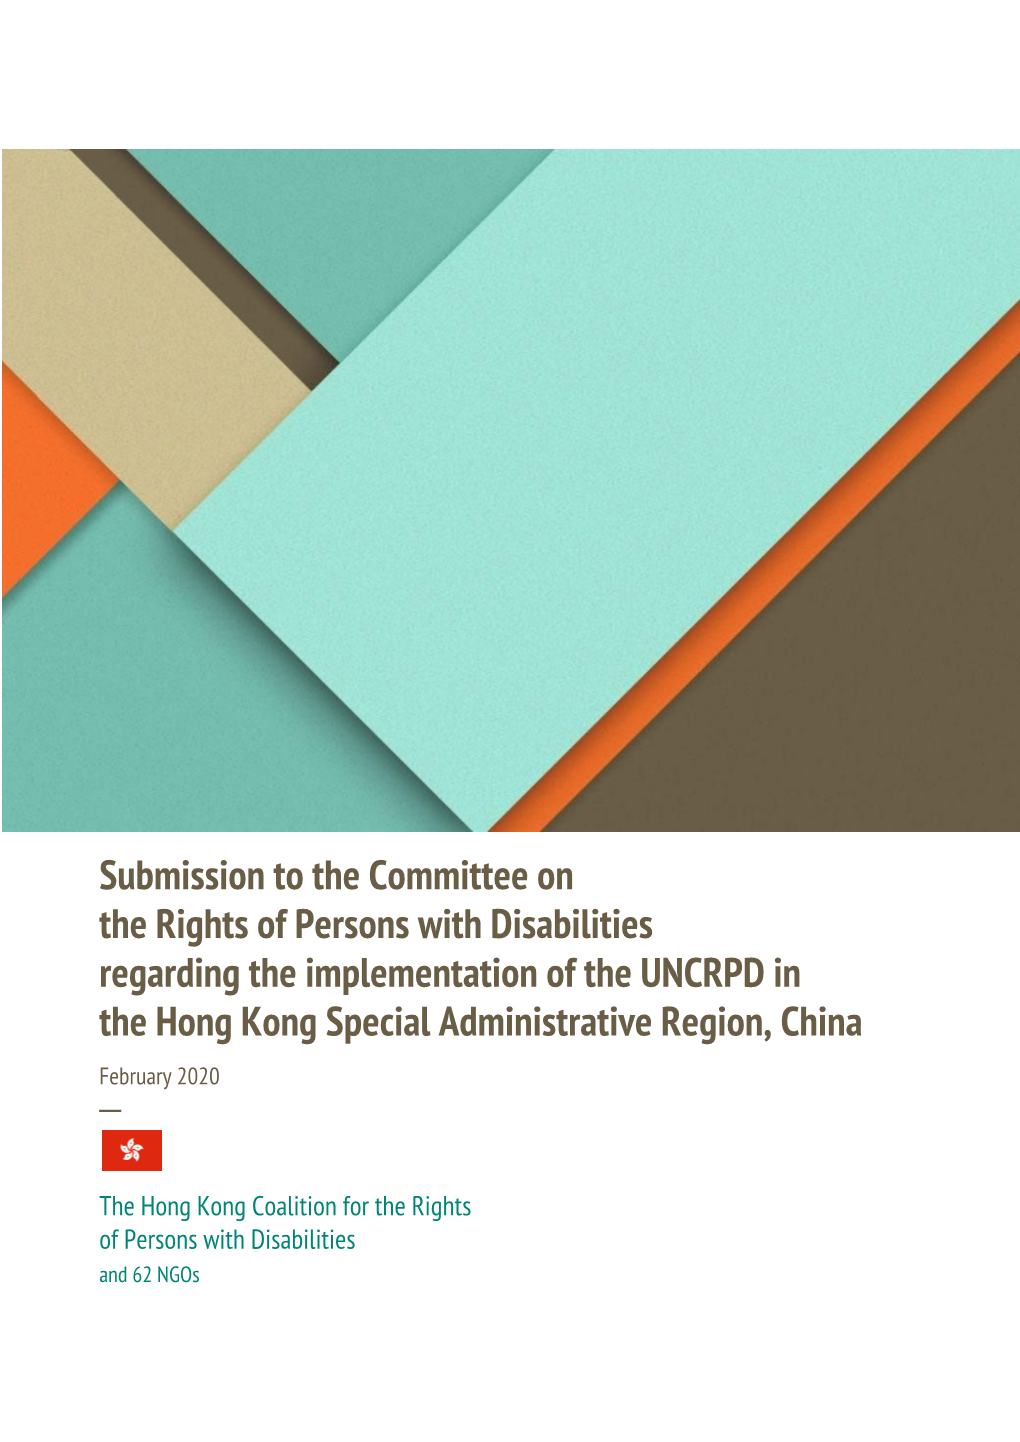 Submission to the Committee on the Rights of Persons with Disabilities